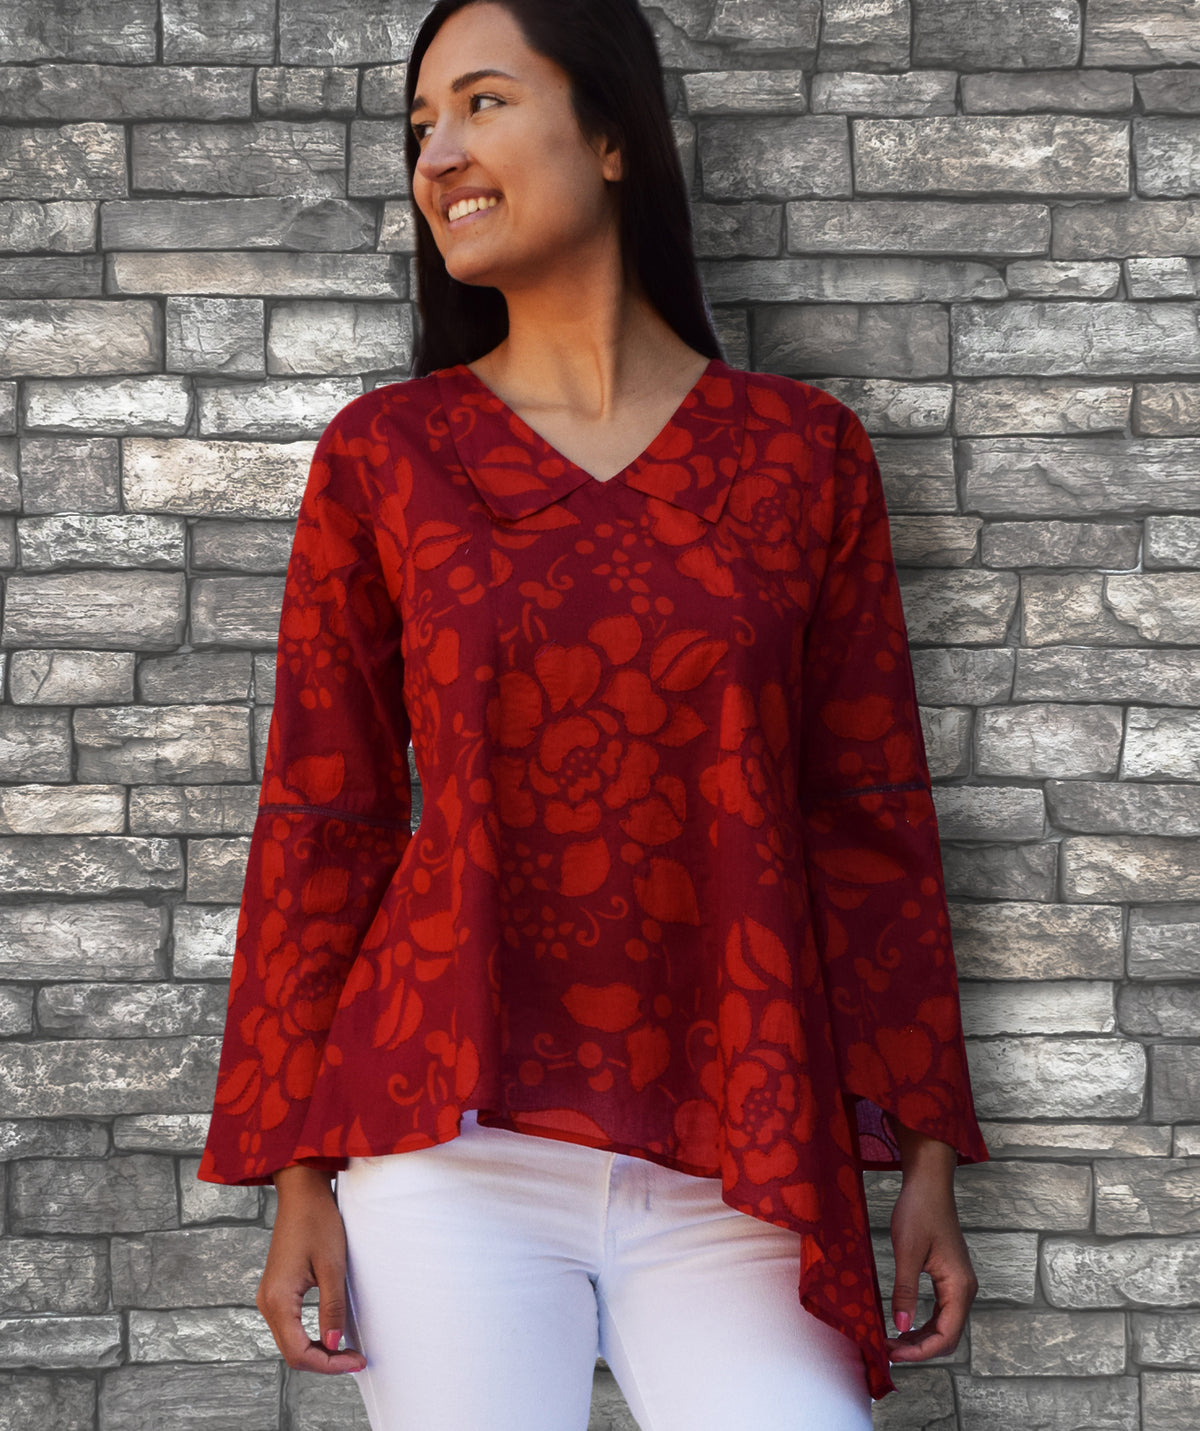 NORA Printed Soft Cotton Hand Embroidered Uneven Hem Tunic Top: Made to Order/Customizable